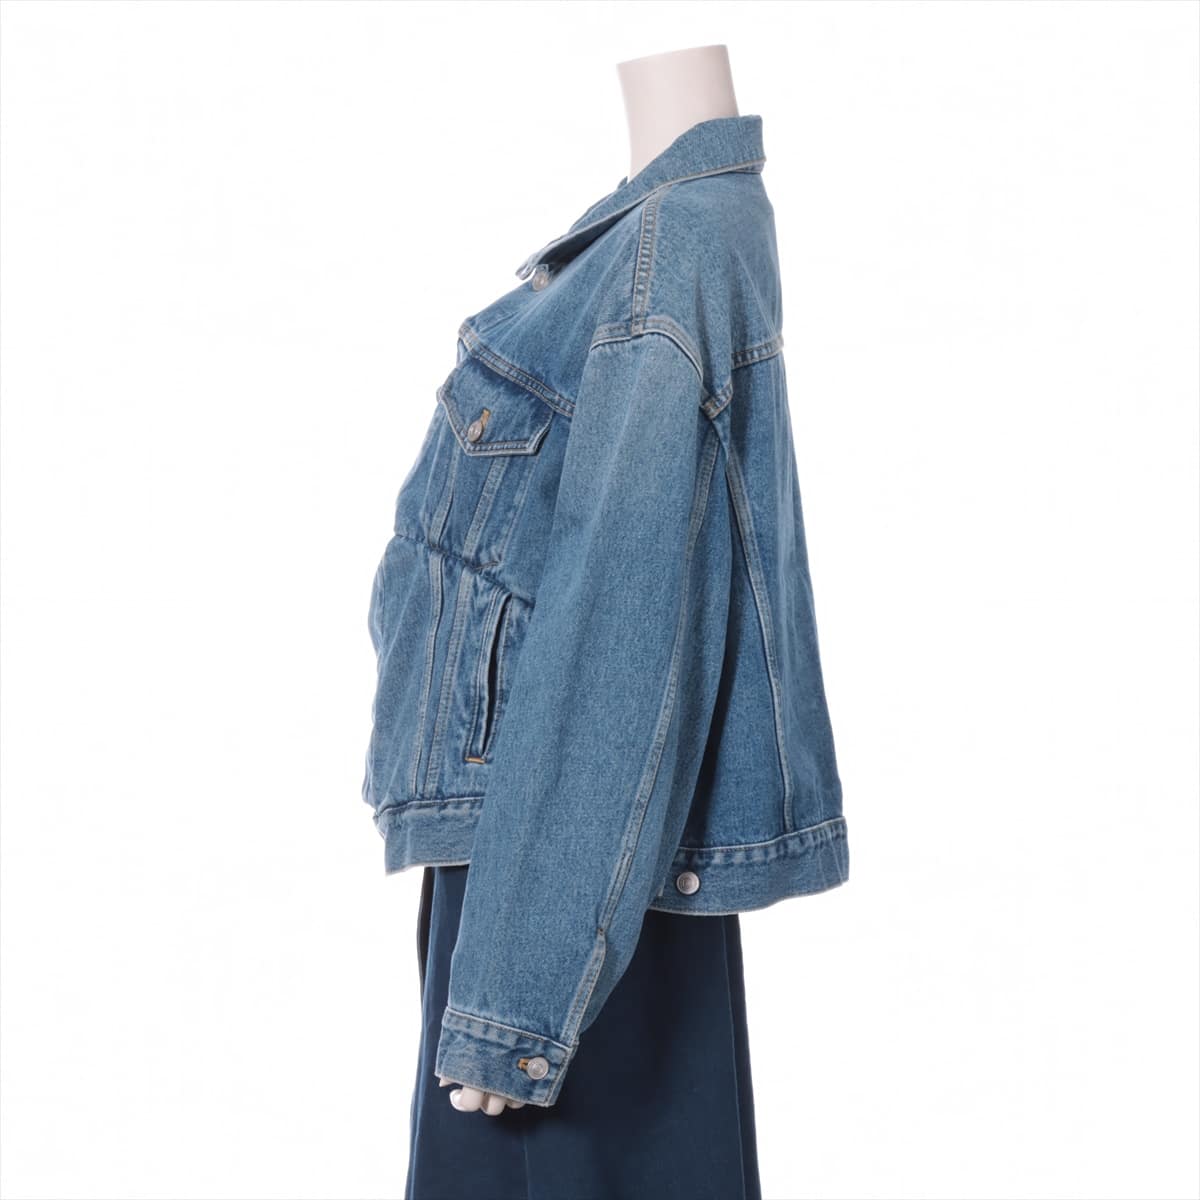 Balenciaga 16 years Cotton Denim jacket 36 Ladies' Blue  There are fragrance remnants